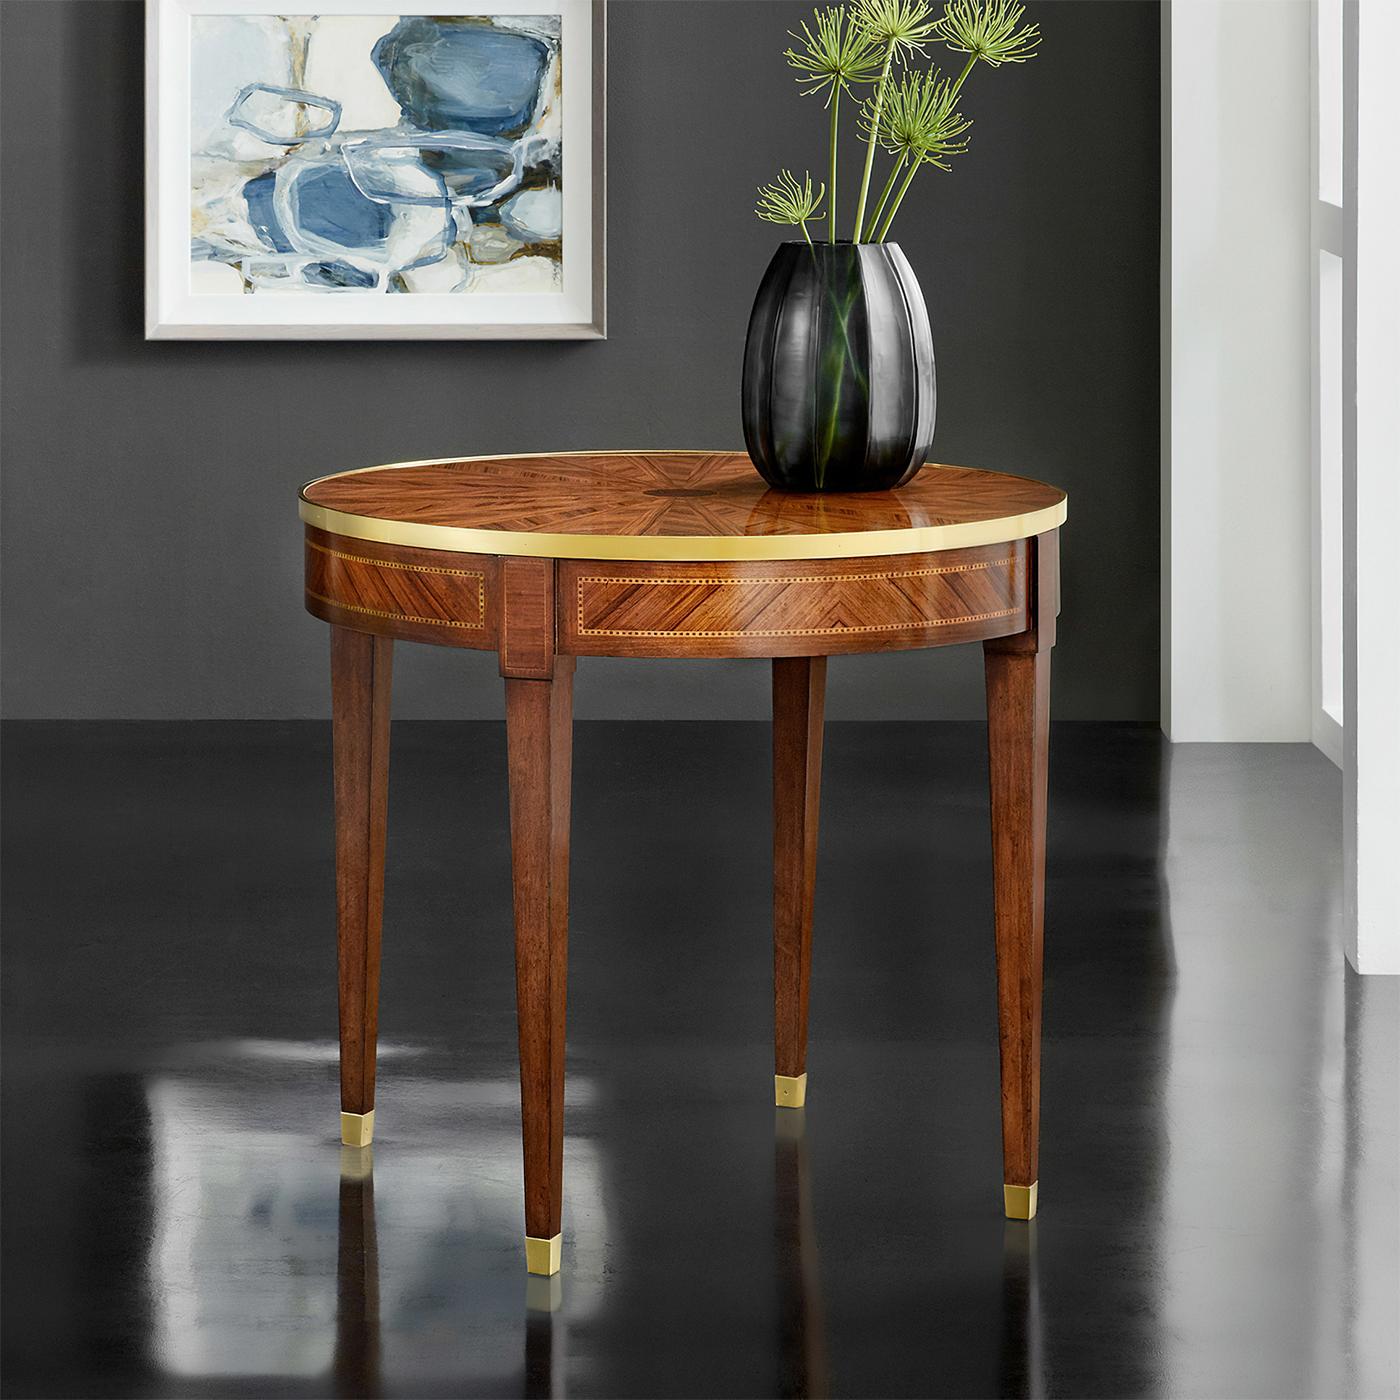 French Round Side Table, in the Neo Classic Louis XVI Style, this parquetry inlaid side table has a top with a rayed marquetry design and brass trim, the frieze crossbanded with inlay and raised on square tapered legs with brass